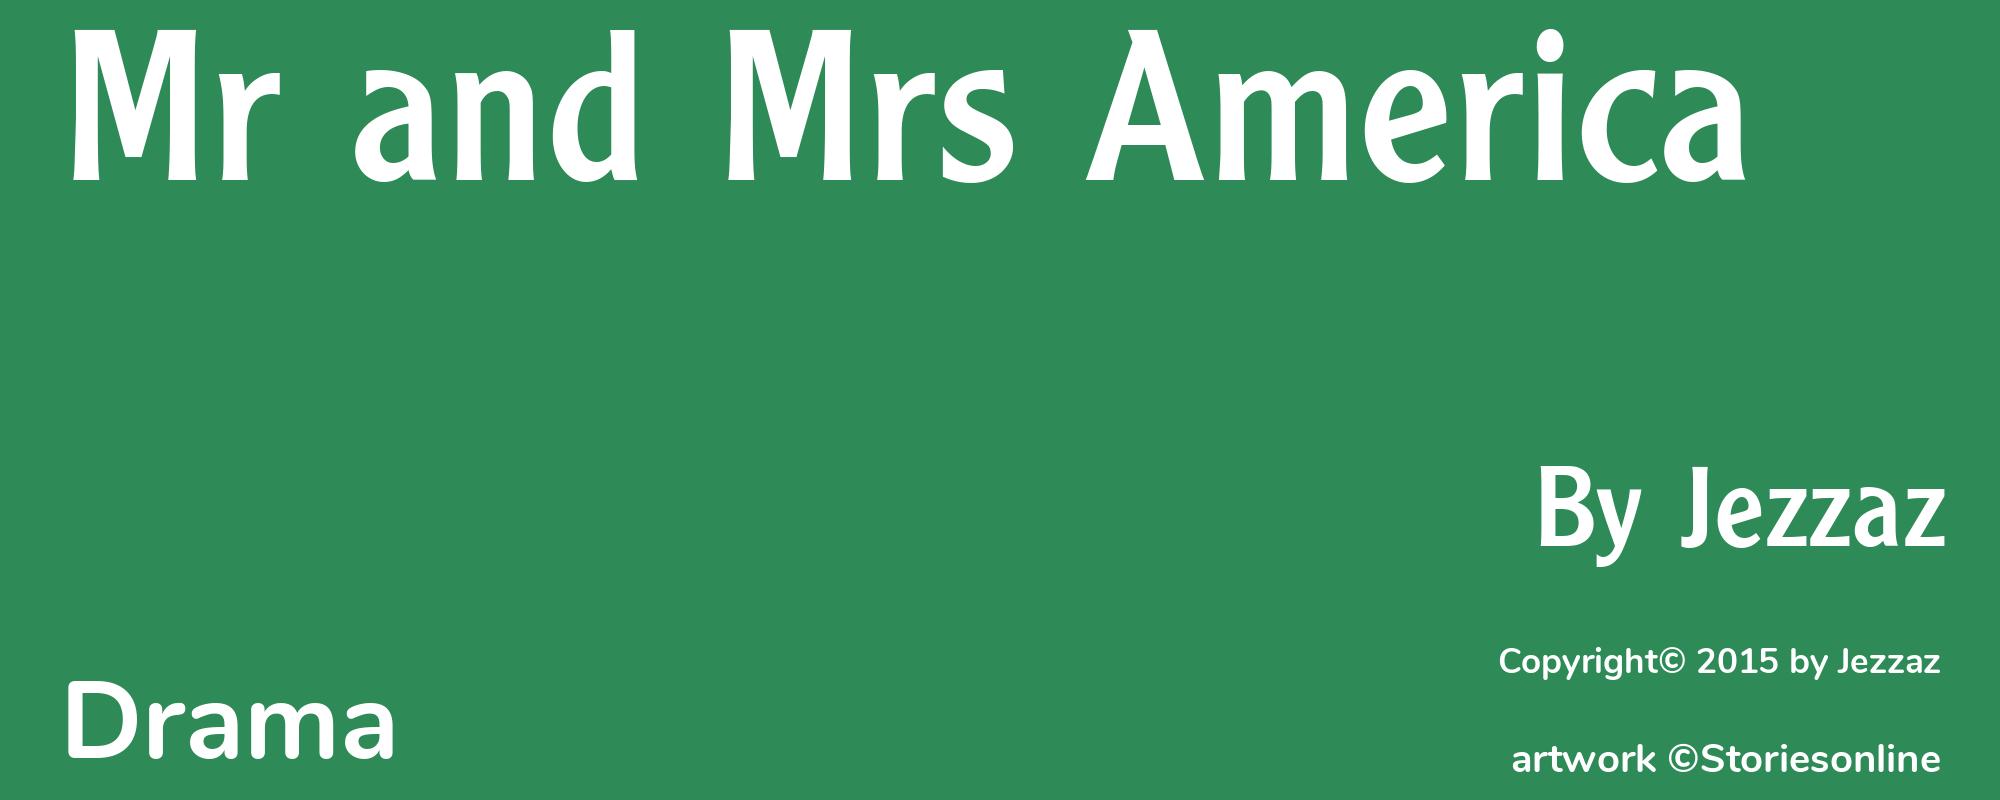 Mr and Mrs America - Cover